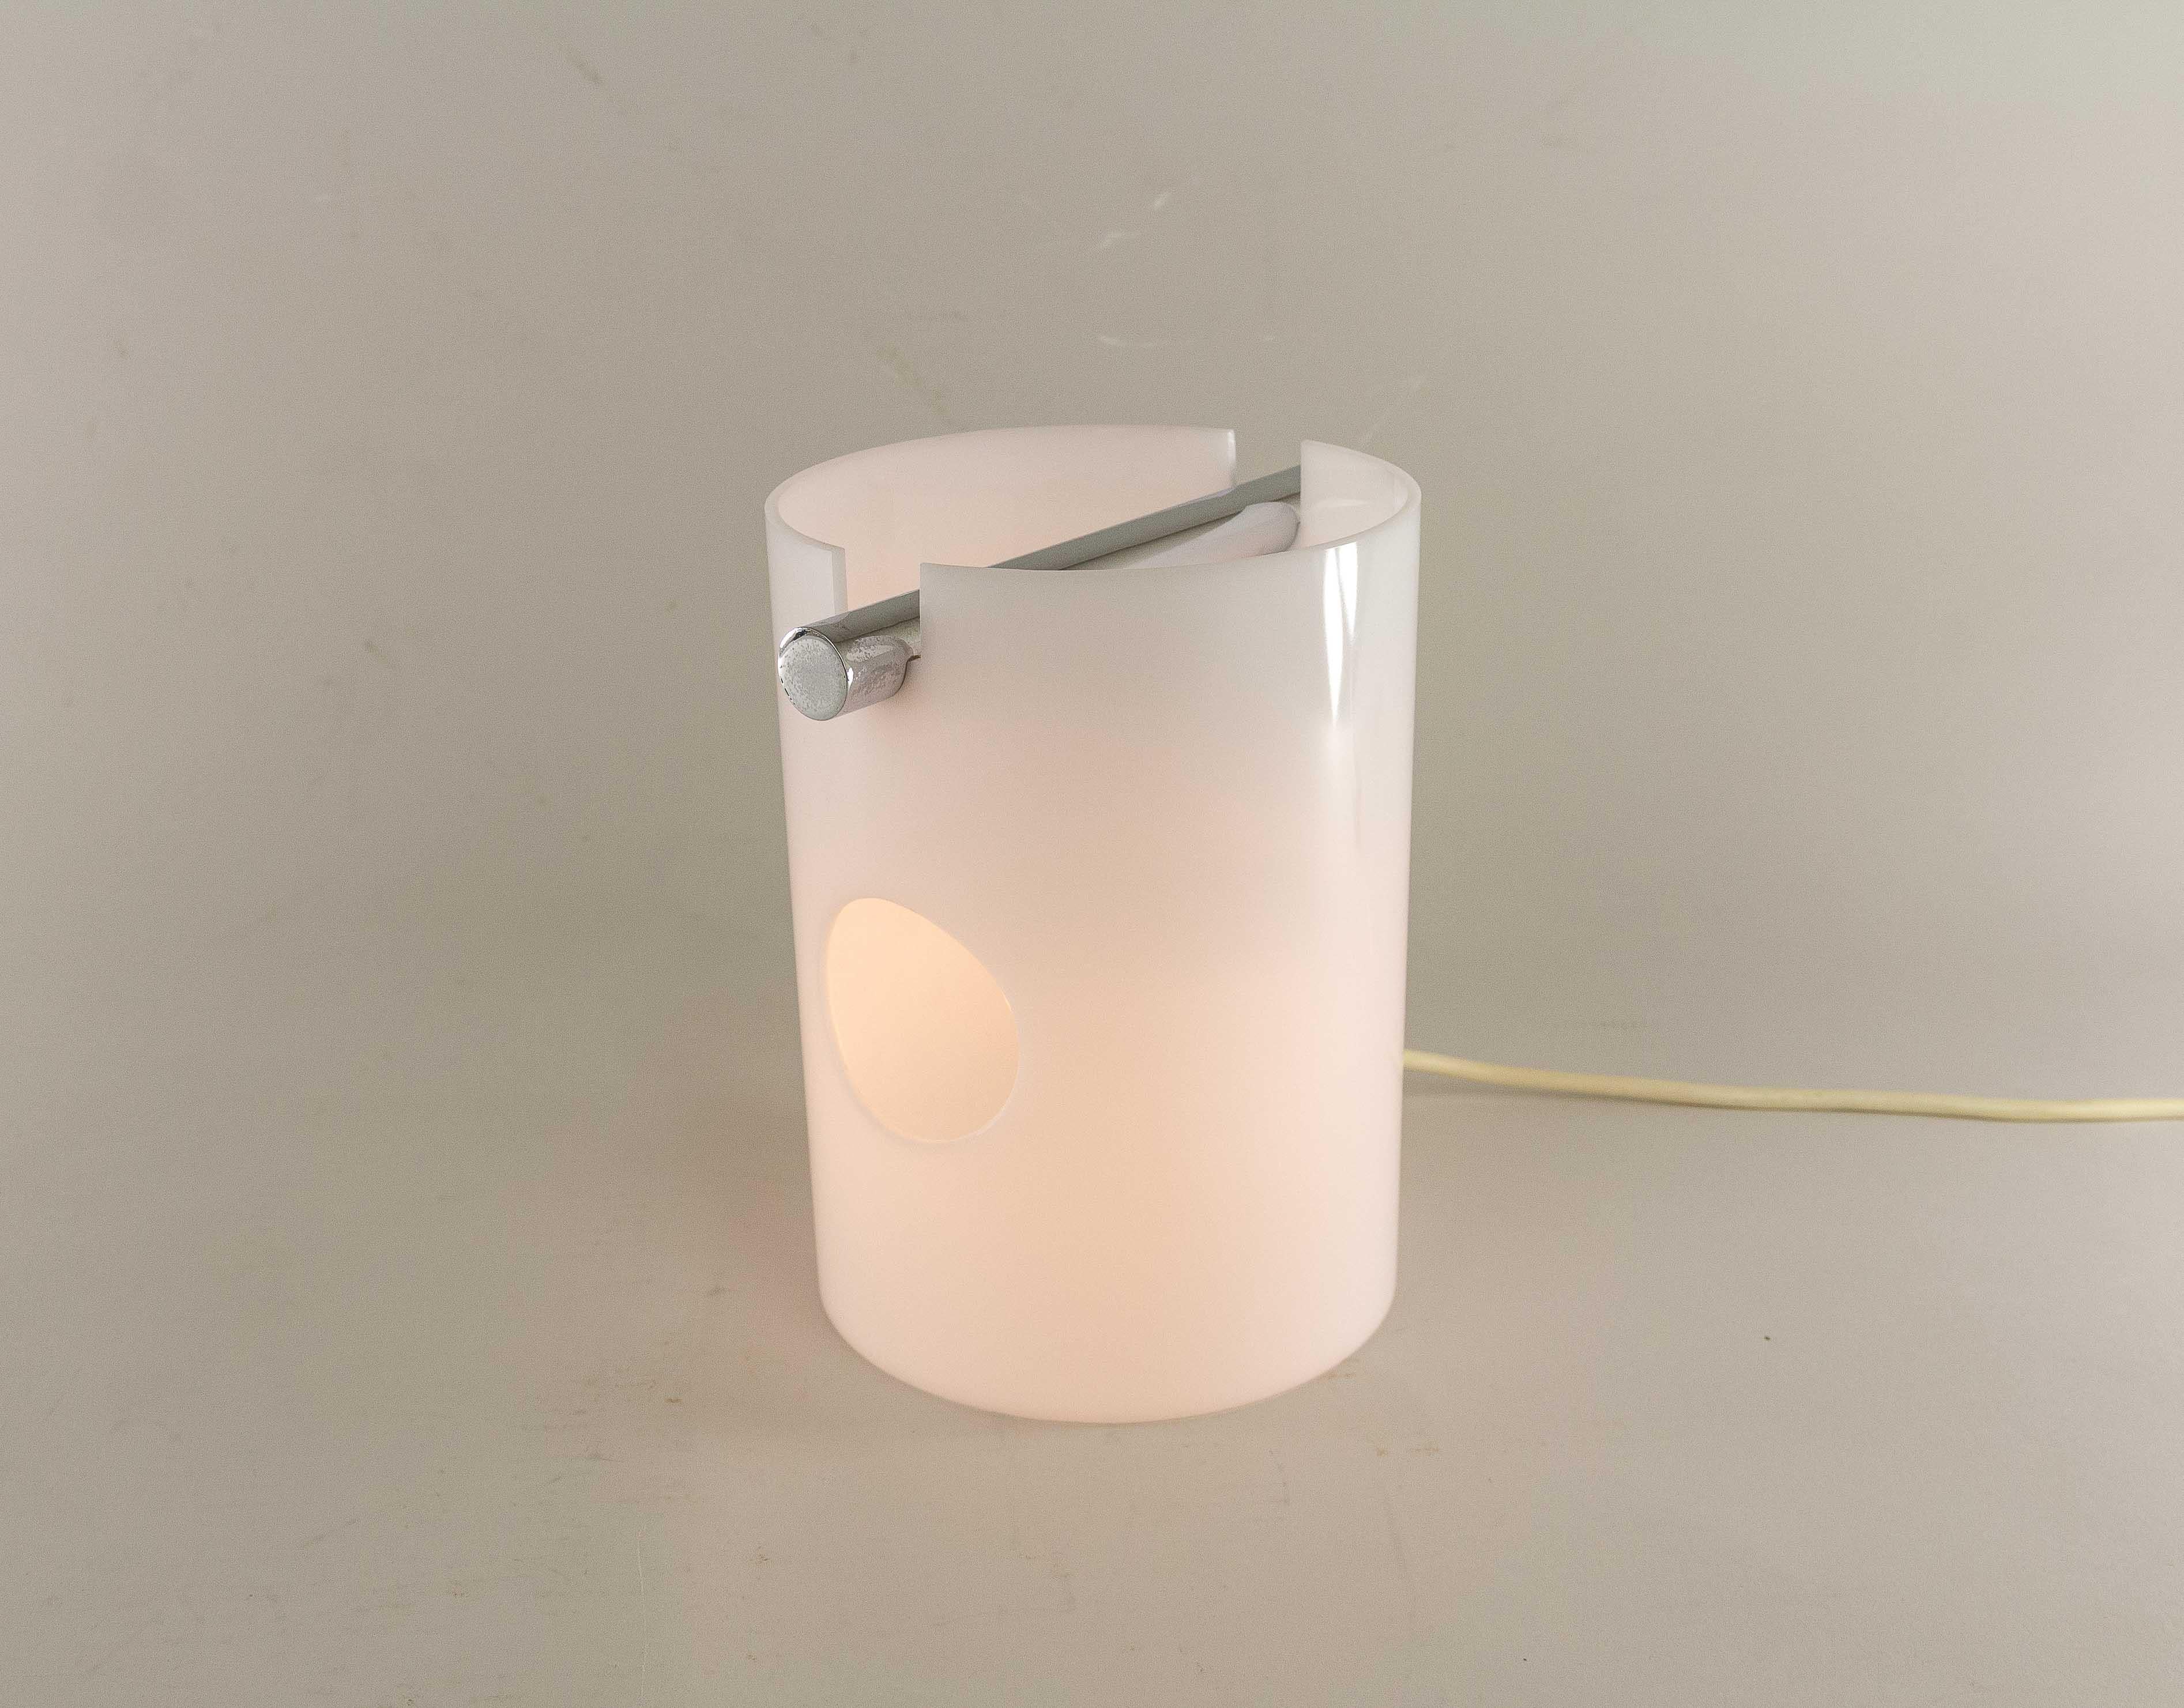 Rare Albina table lamp by Giuliana Gramigna for Italian manufacturer Quattrifolio.

Minimalist lamp with a lamp holder that is incorporated into the design in a subtle and ingenious way. This model was released simultaneously with the considerably